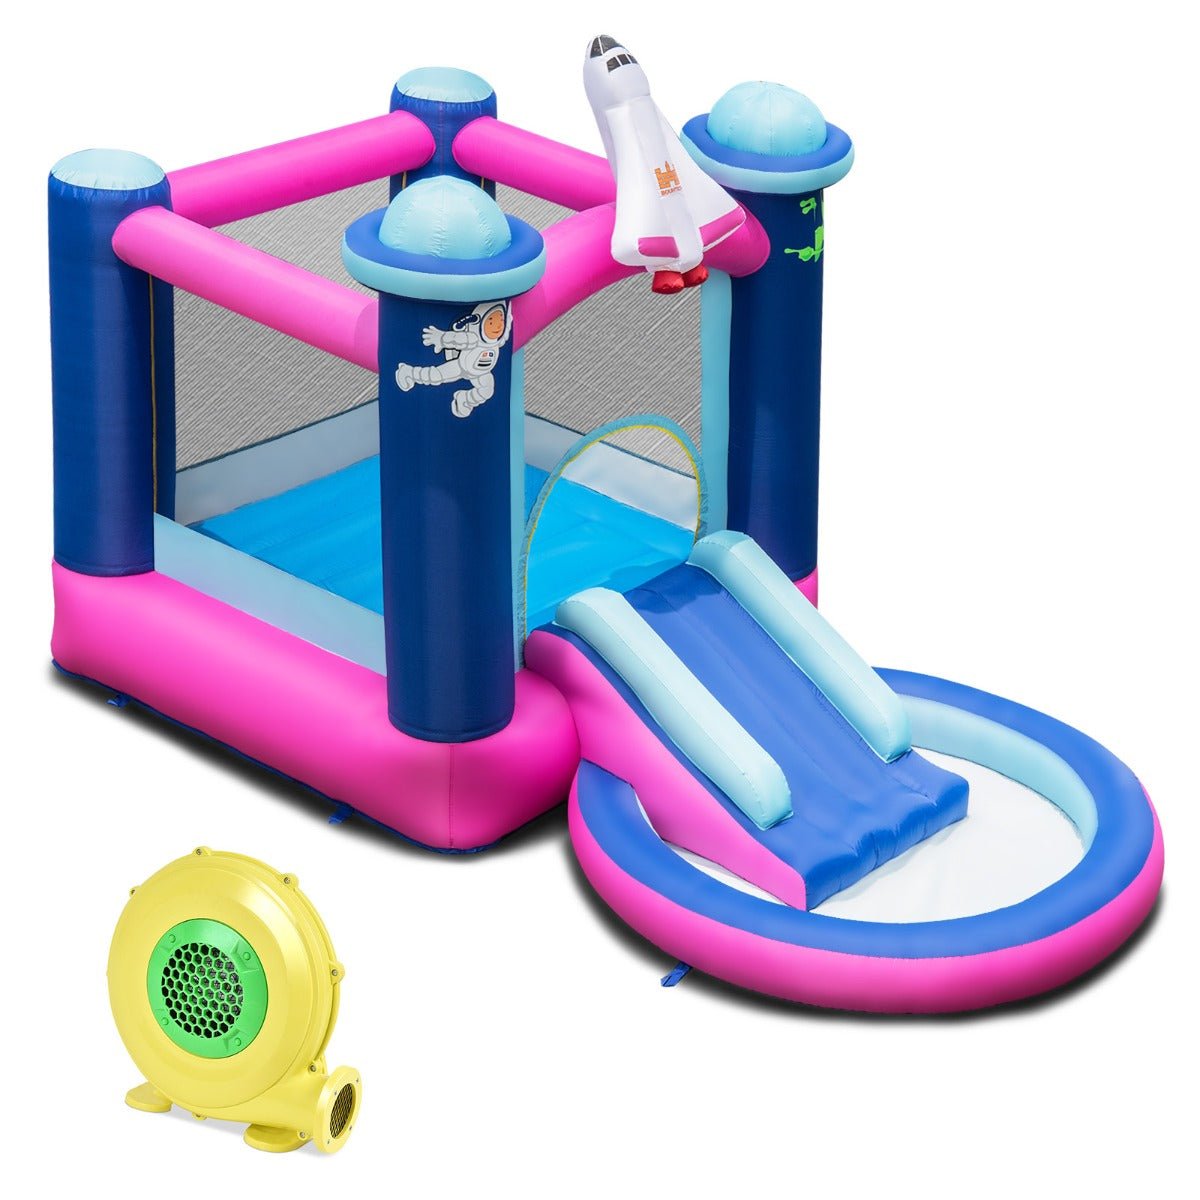 Inflatable Space Bounce House with Jumping Area & Slide - Galactic Adventure